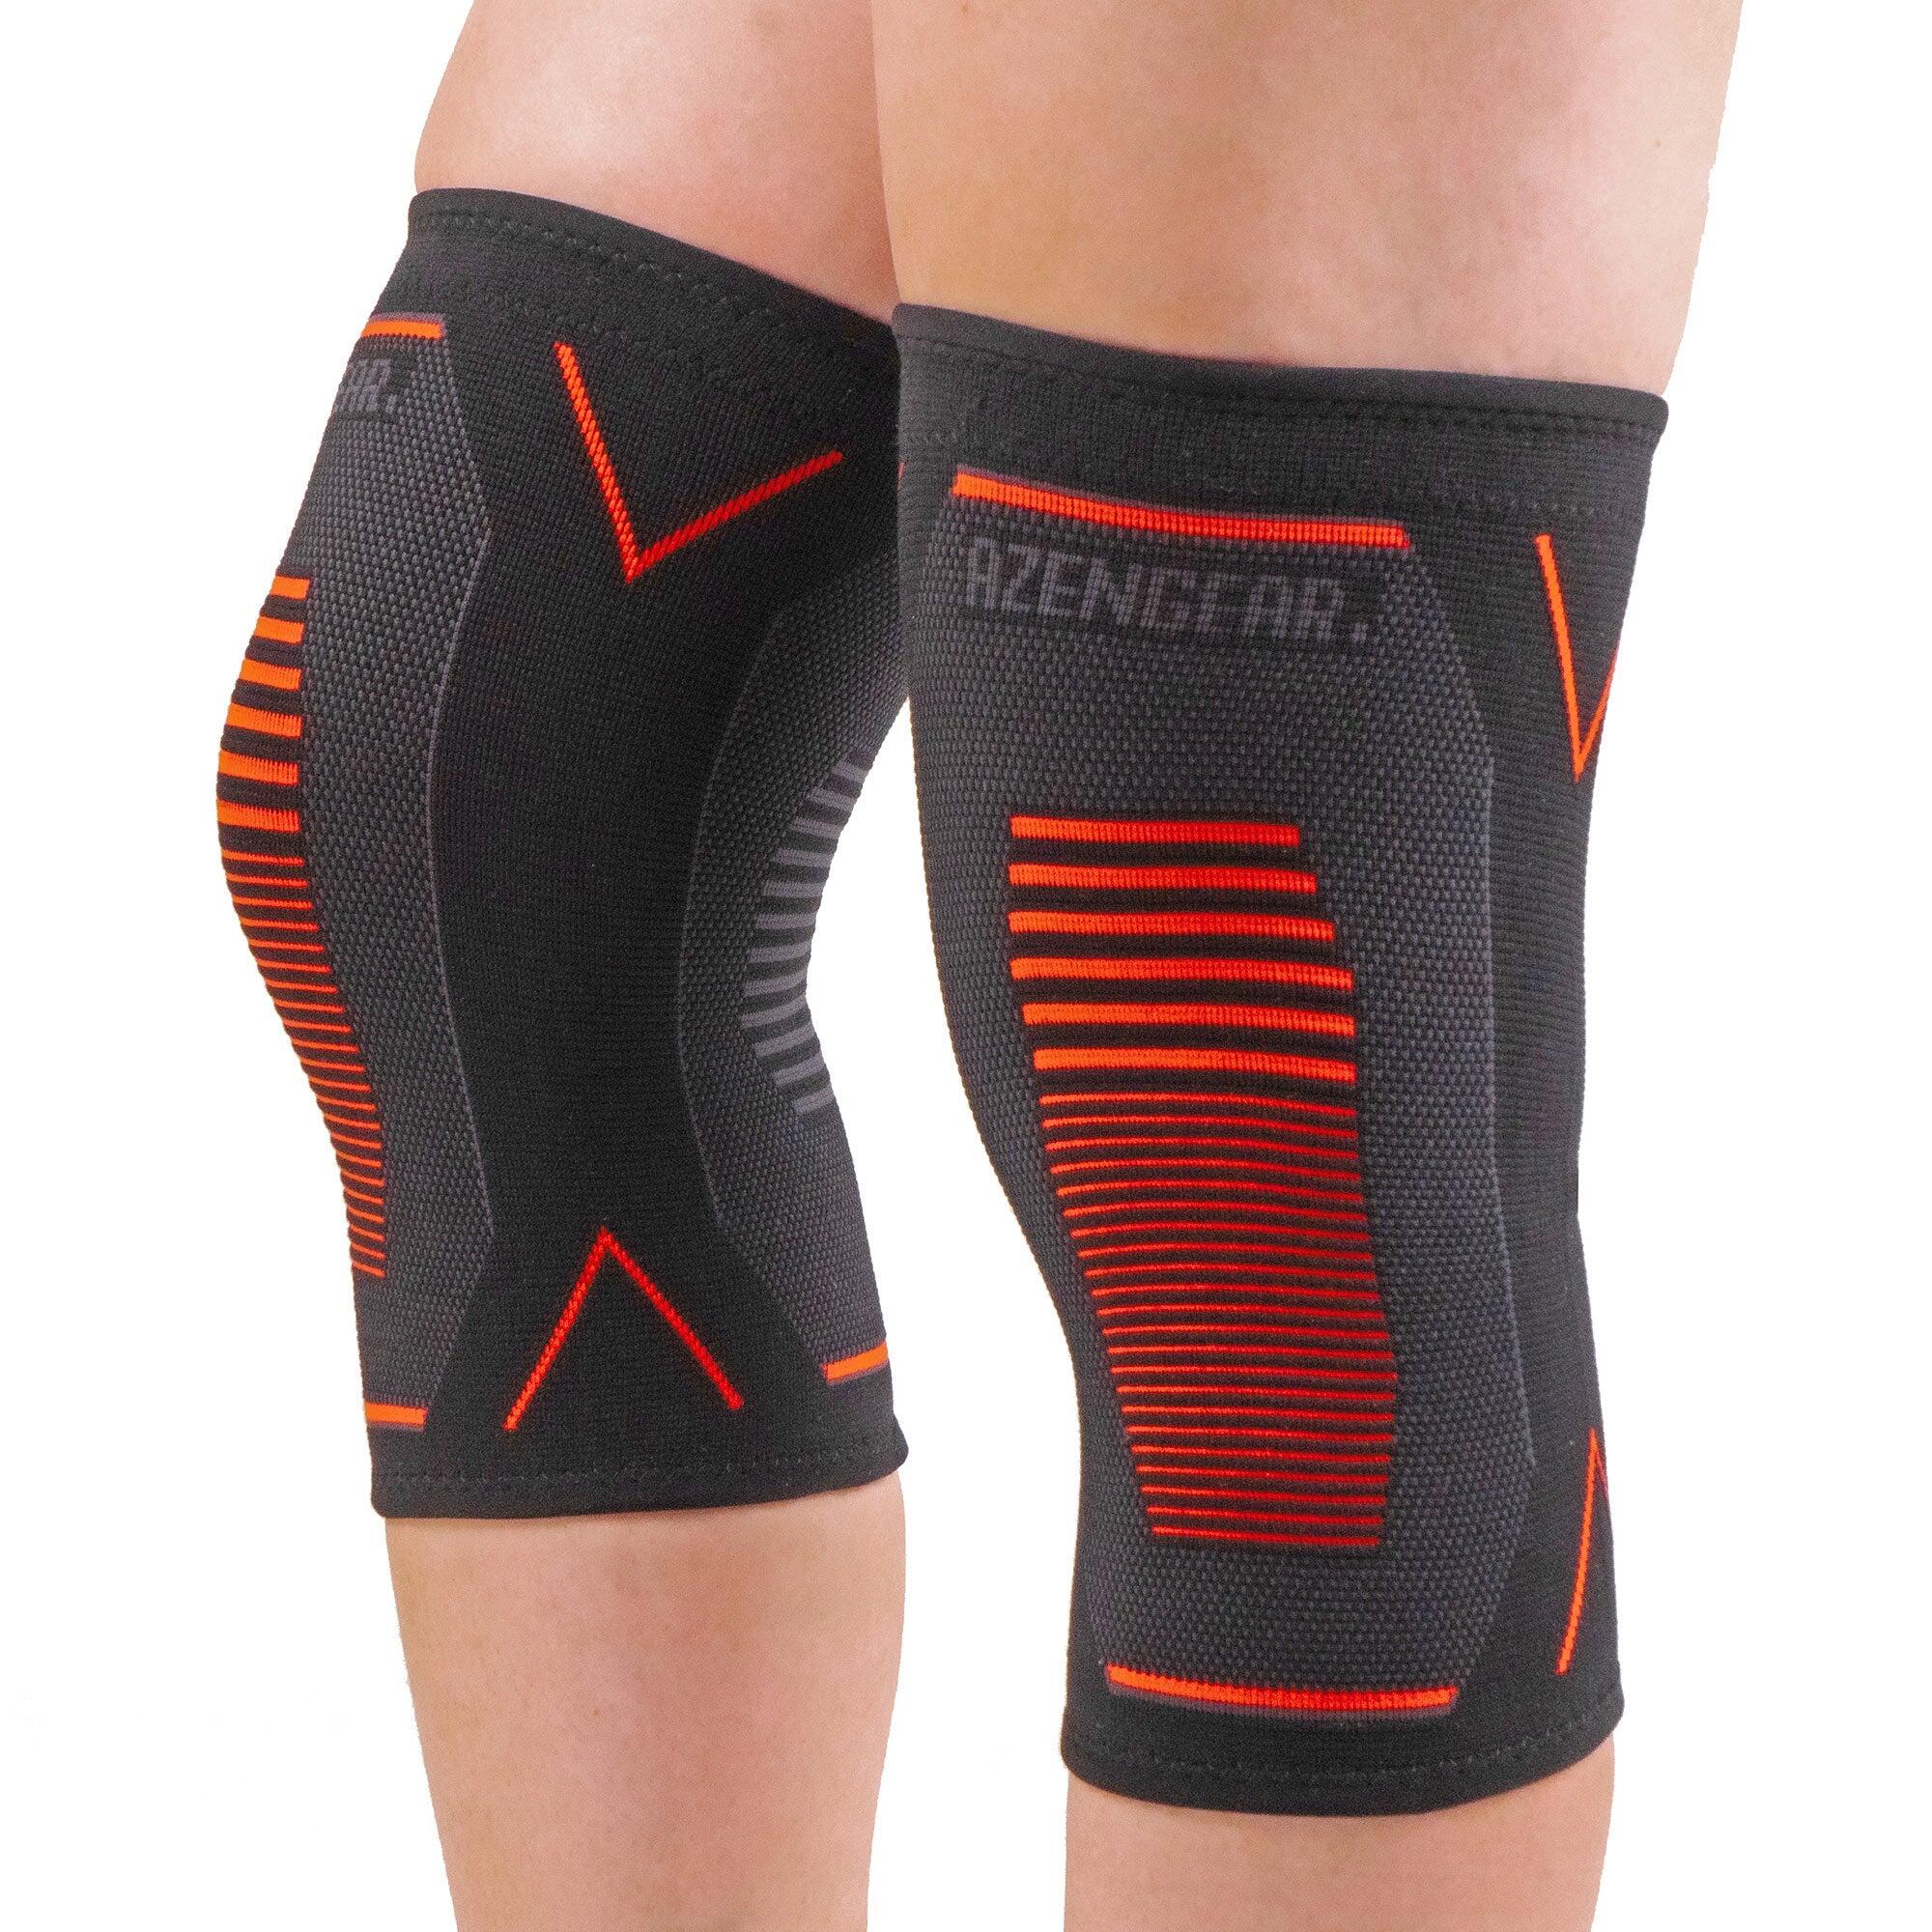 Knee Compression Support Brace (Pair) for Running, Arthritis, ACL, MCL 1/8